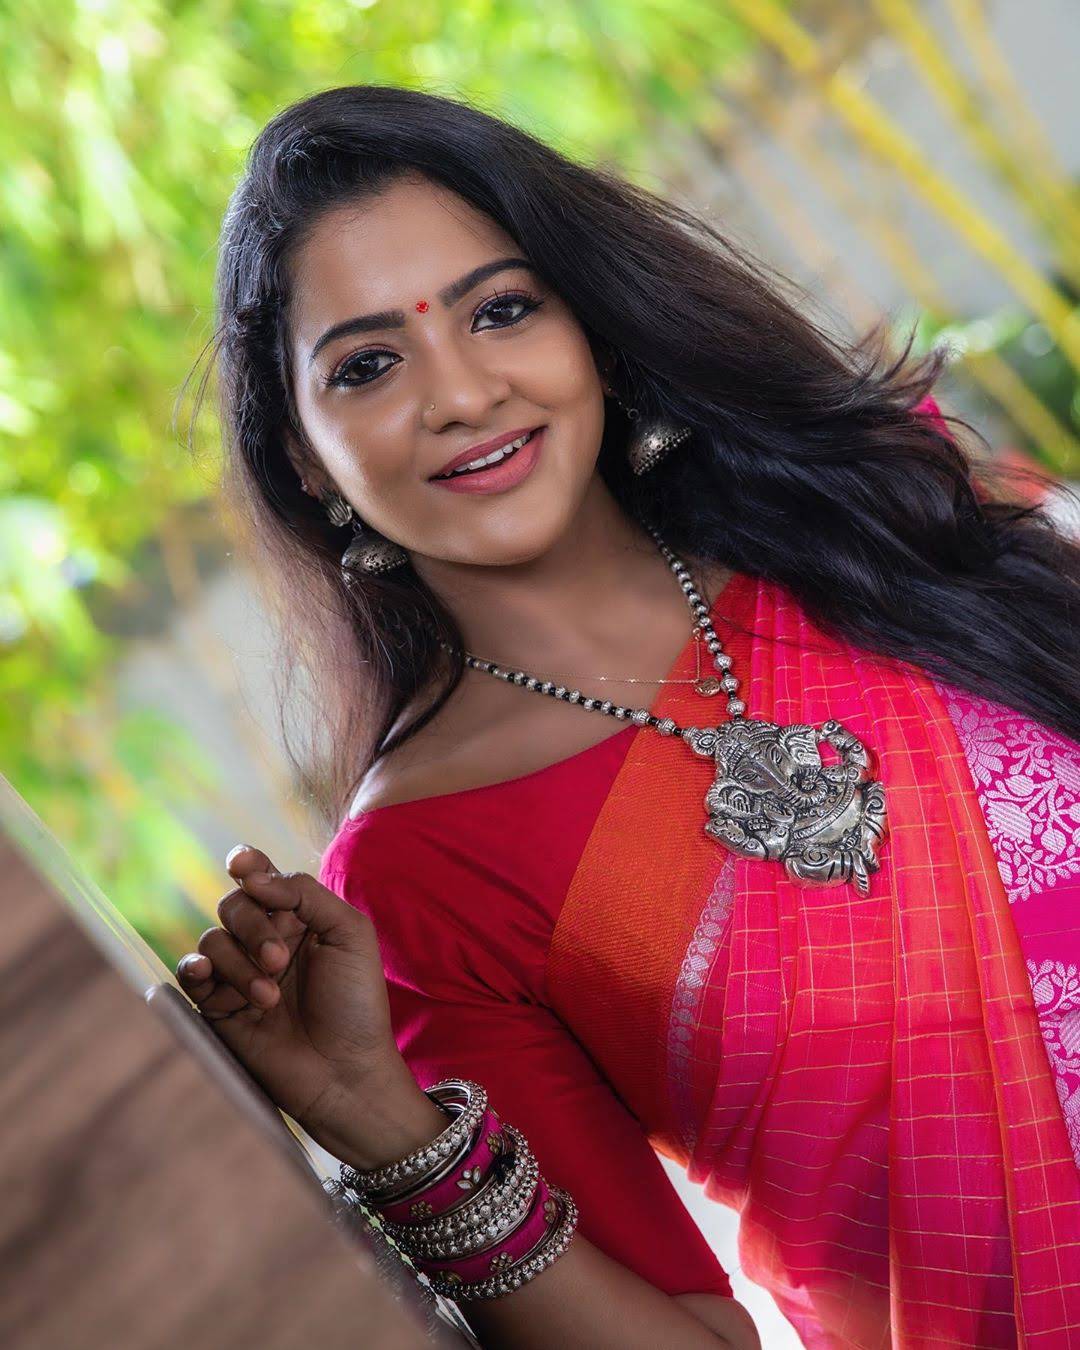 VJ Chitra Wiki, Biography, Age, Family, Images, Movies 